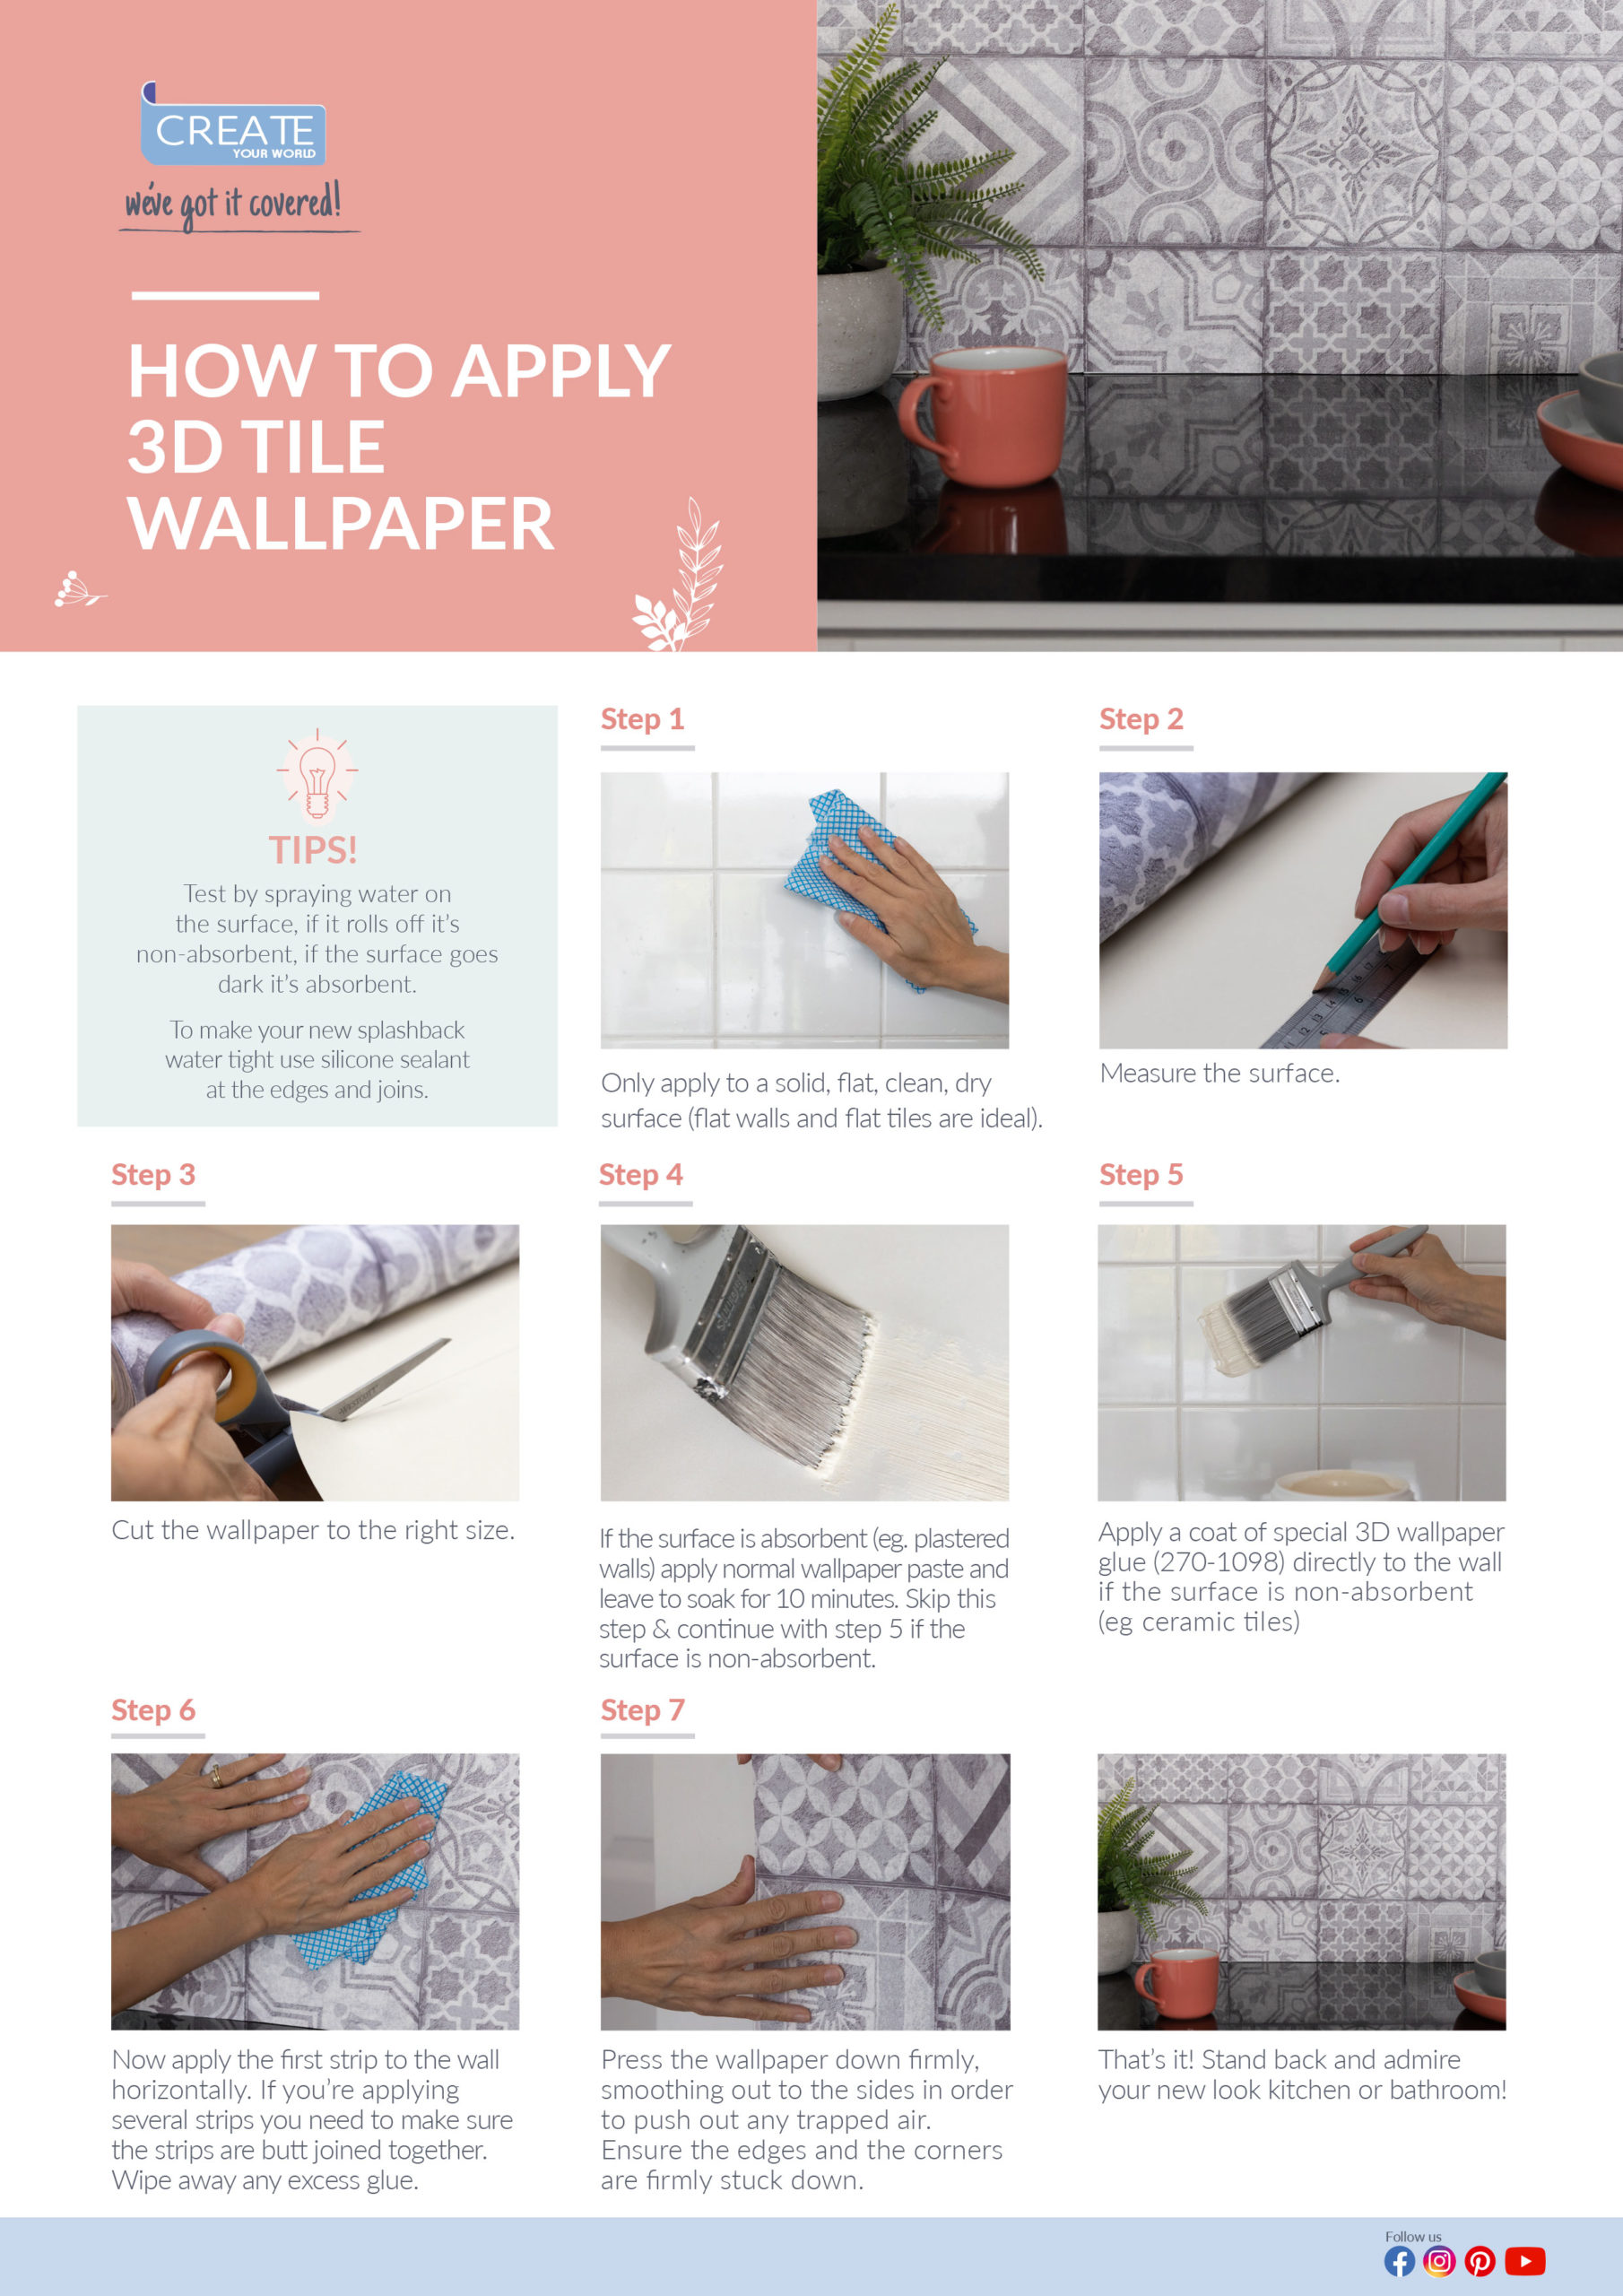 How-To-Apply---3D-TILE-WALLPAPER-Branded_lowres